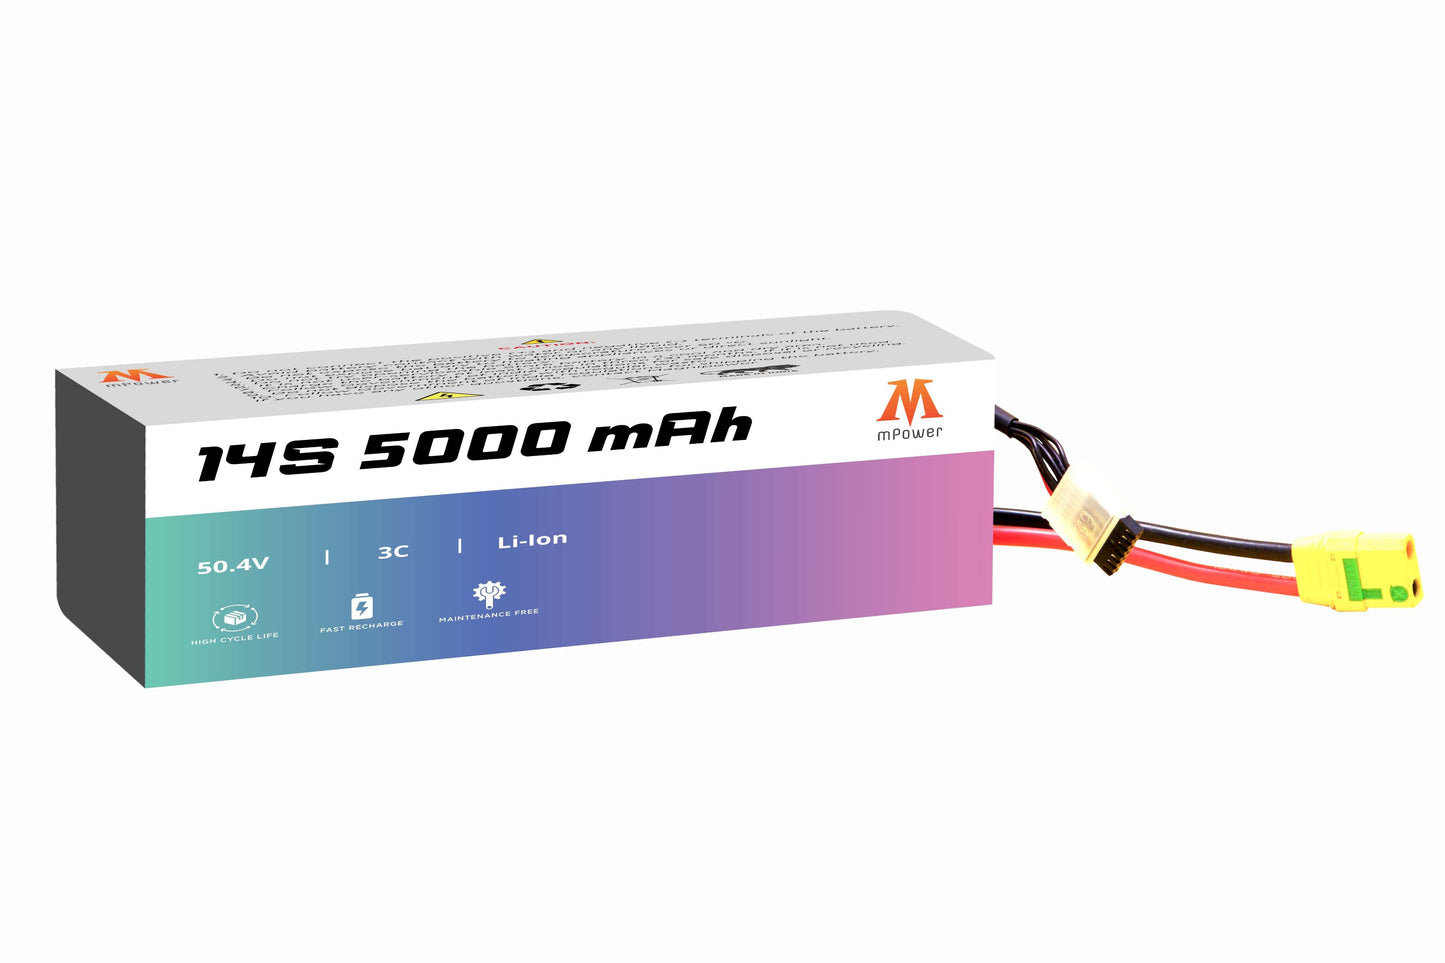 mPower 14S 5000mAh Lithium-Ion Battery for Surveillance Drones